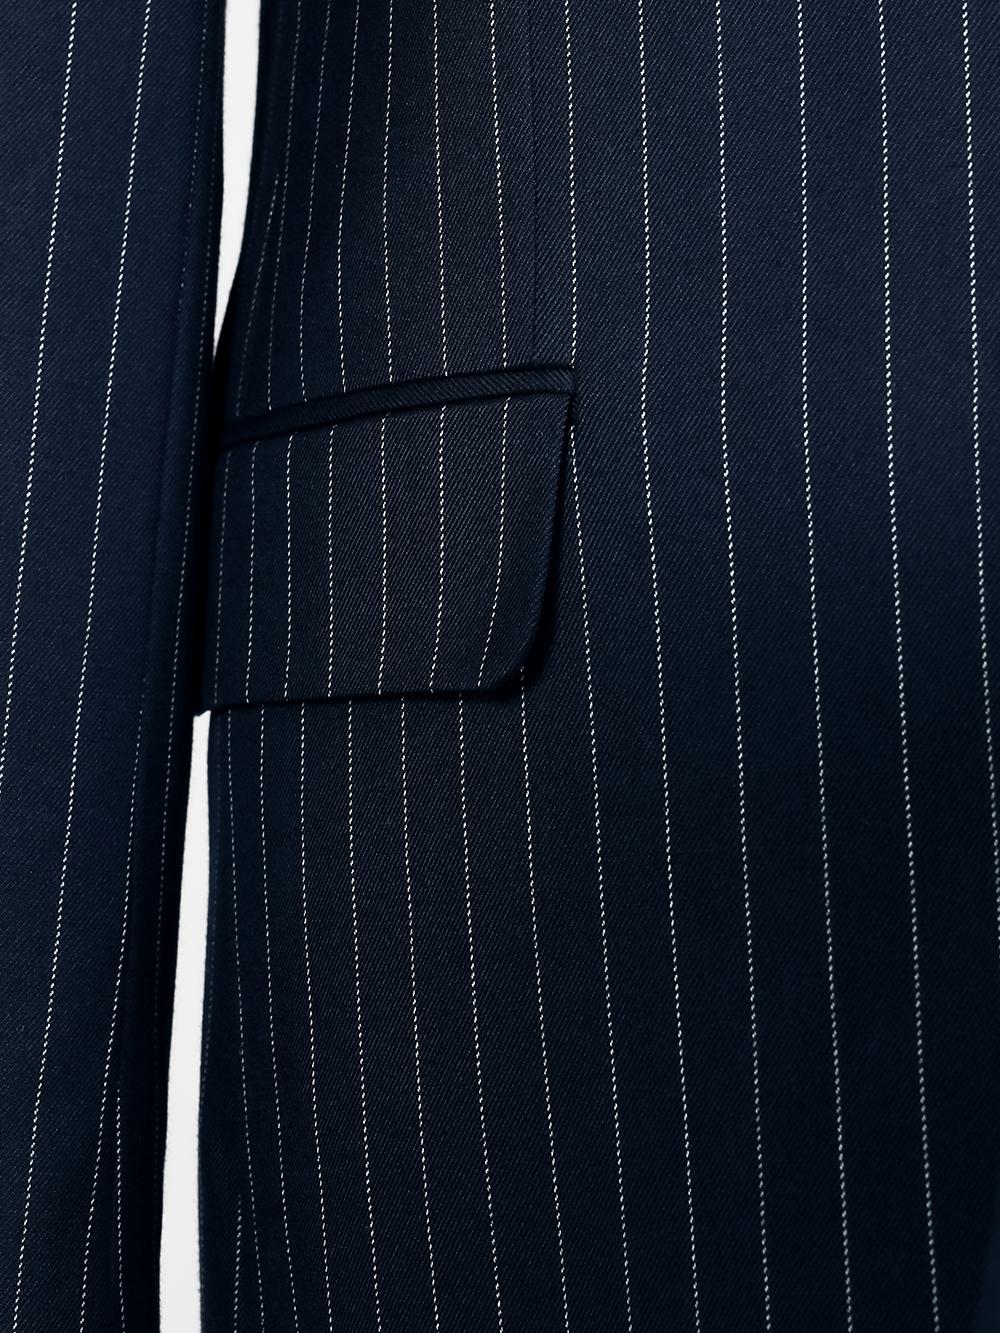 Three Pieces Of Black Stripes Bespoke Men Suit Tailored